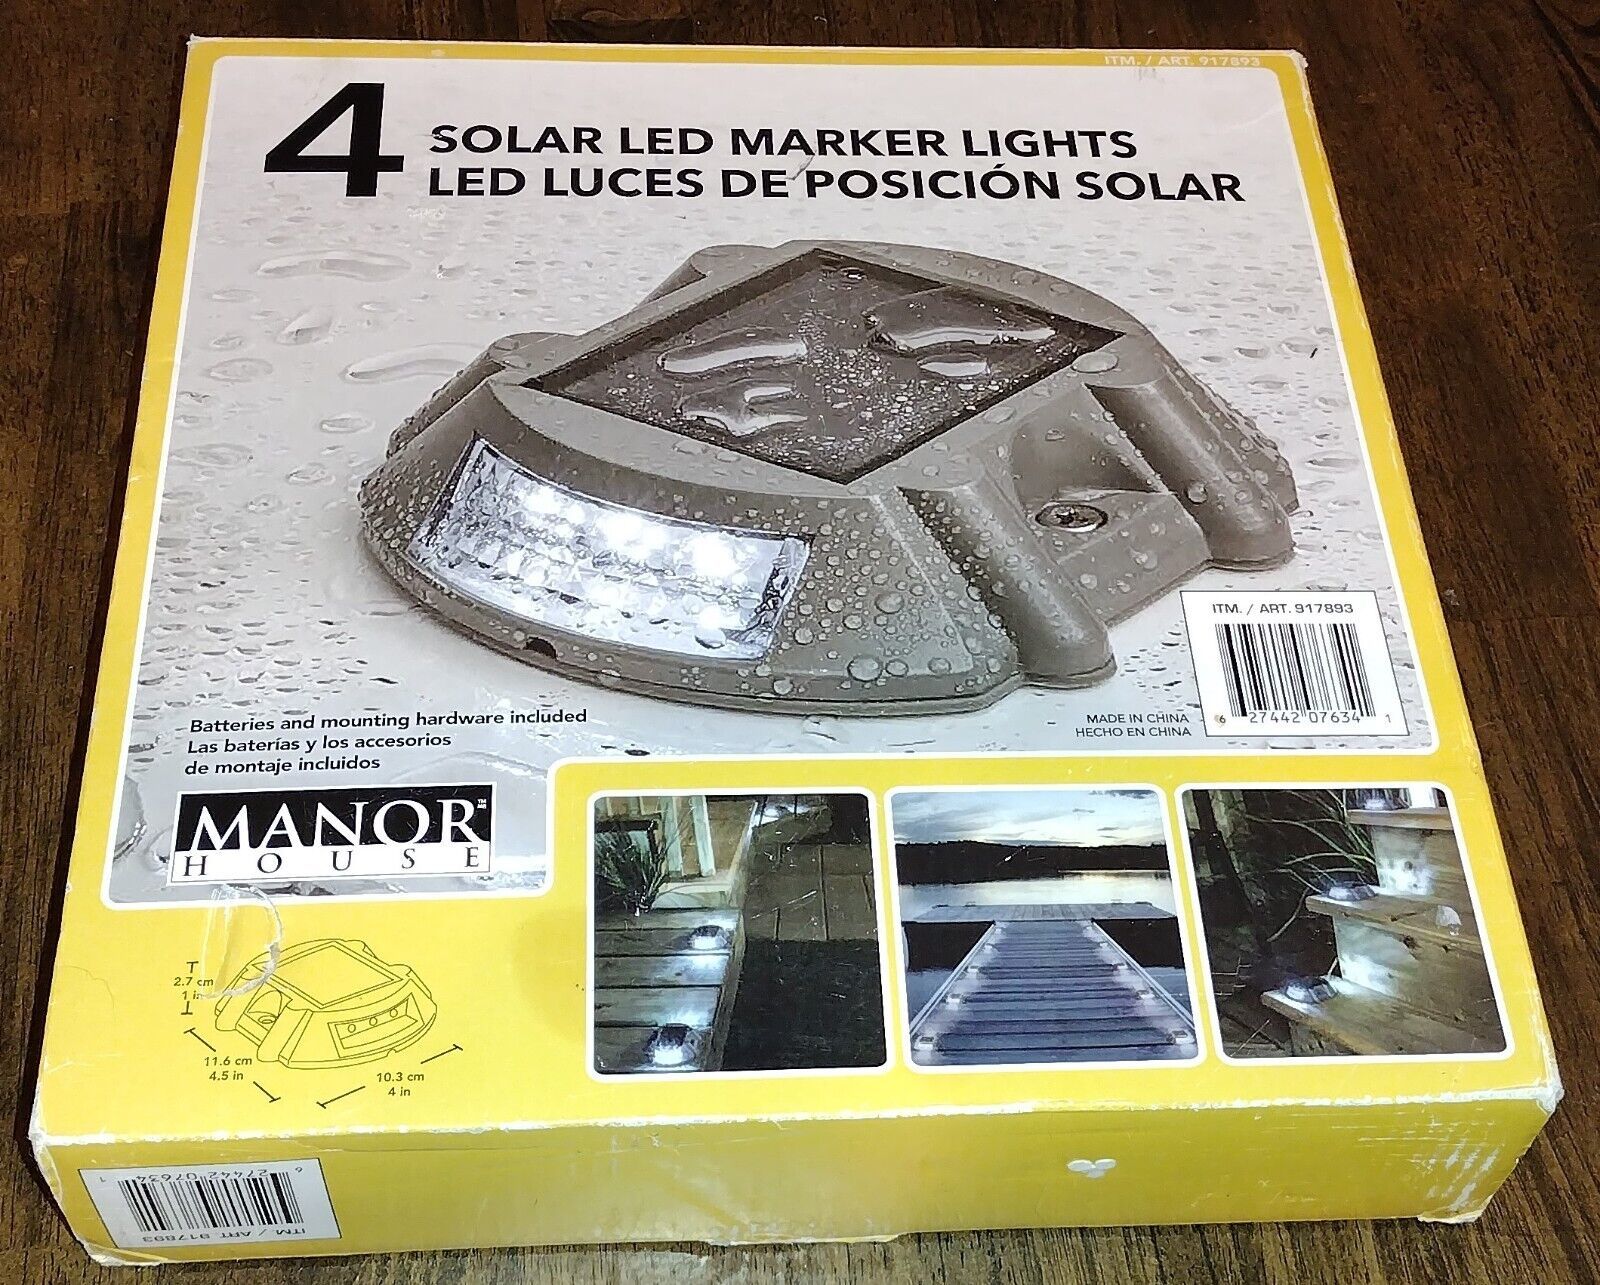 NEW-Manor House Deck/Driveway/Stairway LED Solar Marker Lights - Set of 4 - $69.99